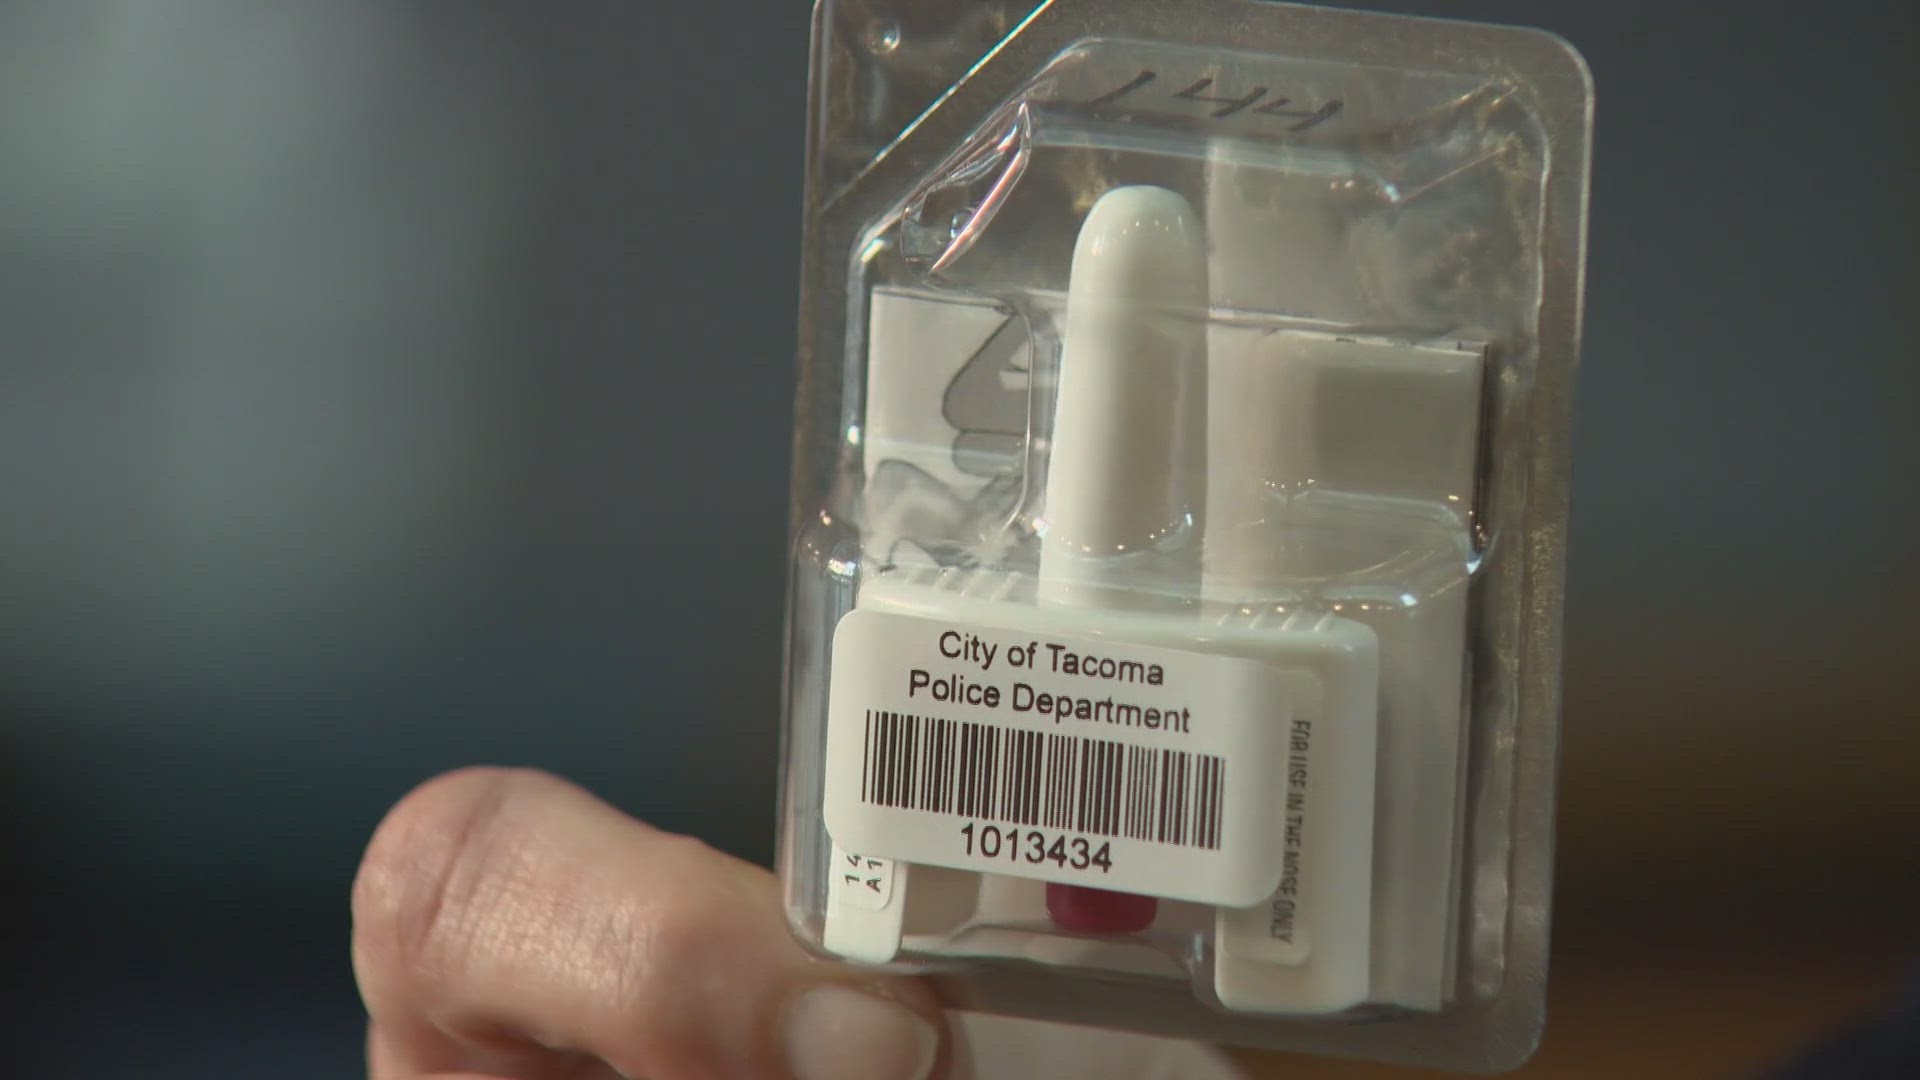 According to Tacoma police, fentanyl can now be found in our region for as cheap as $1 a pill, and opiate overdose is a "daily occurrence" in the city.